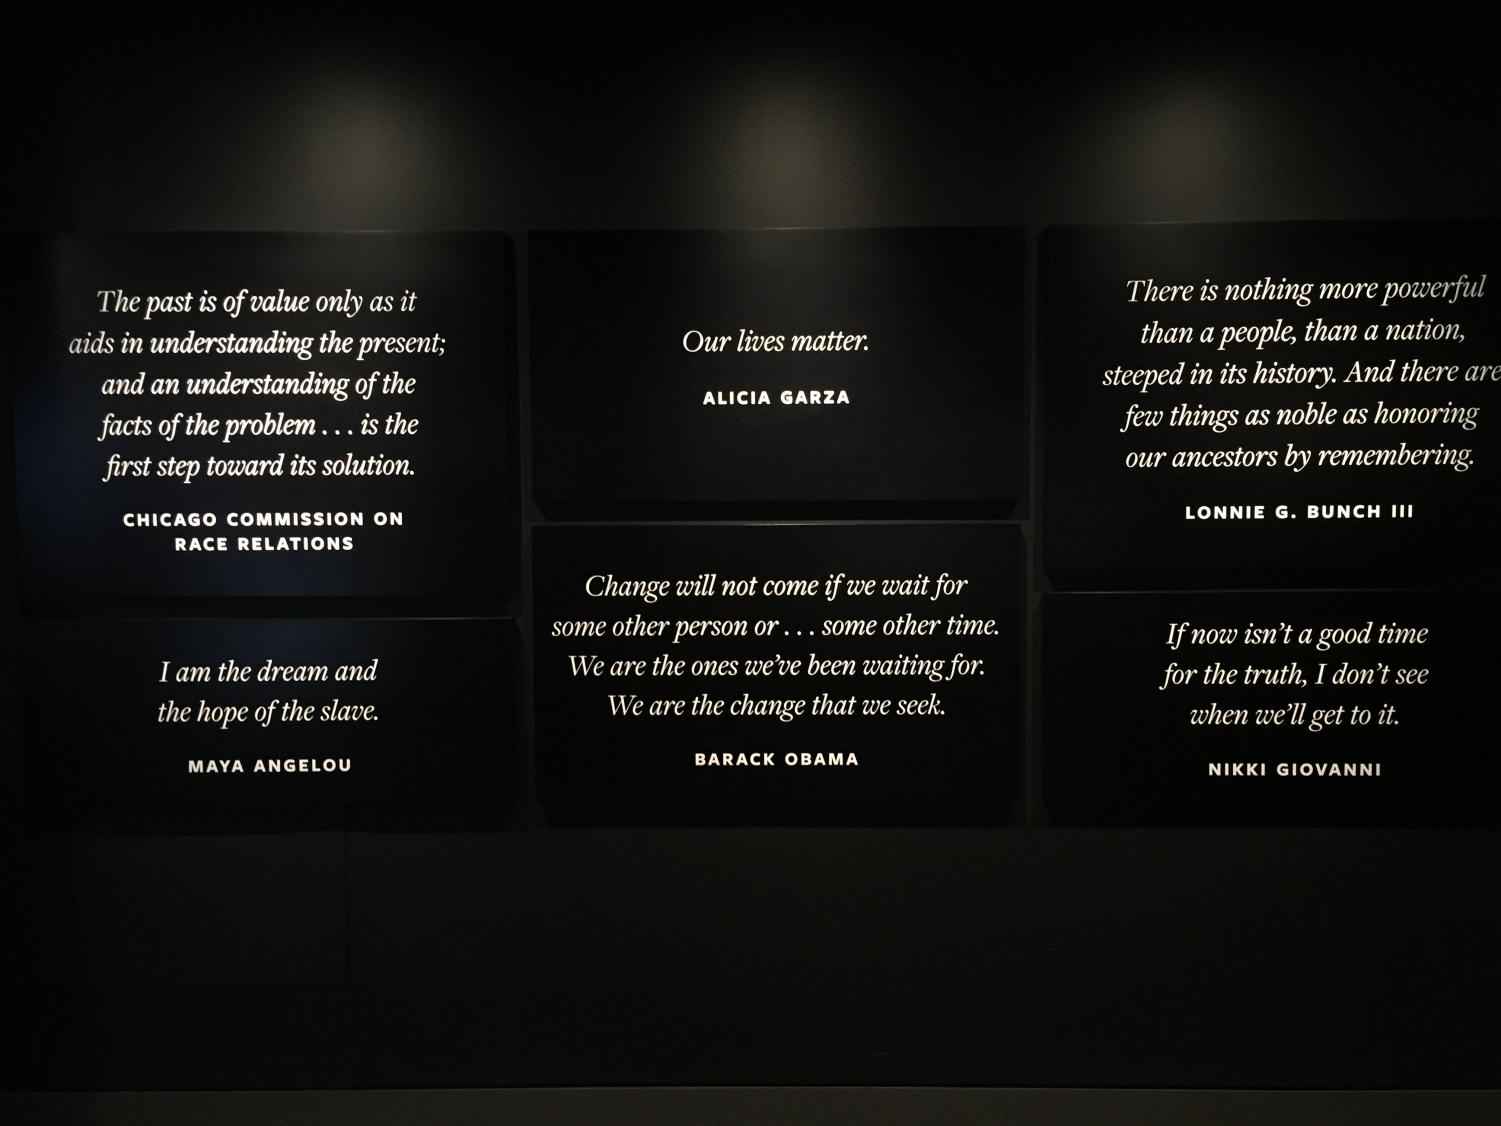 Within the The National Museum of African American History and Culture, there was a separate room dedicated to Till.